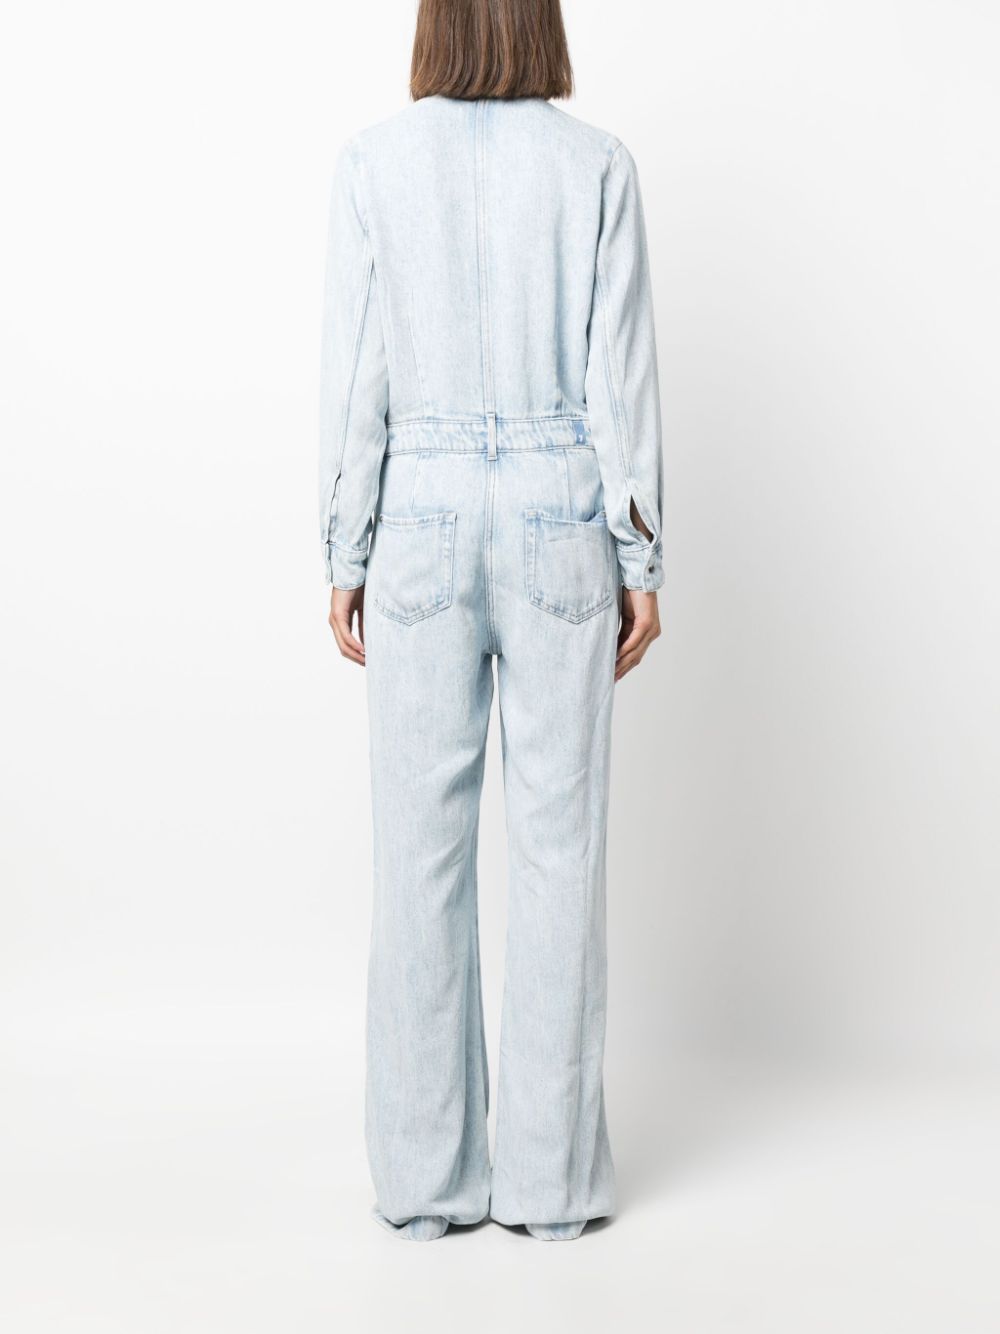 7 For All Mankind 7 FOR ALL MANKIND- Luxe Denim Jumpsuit